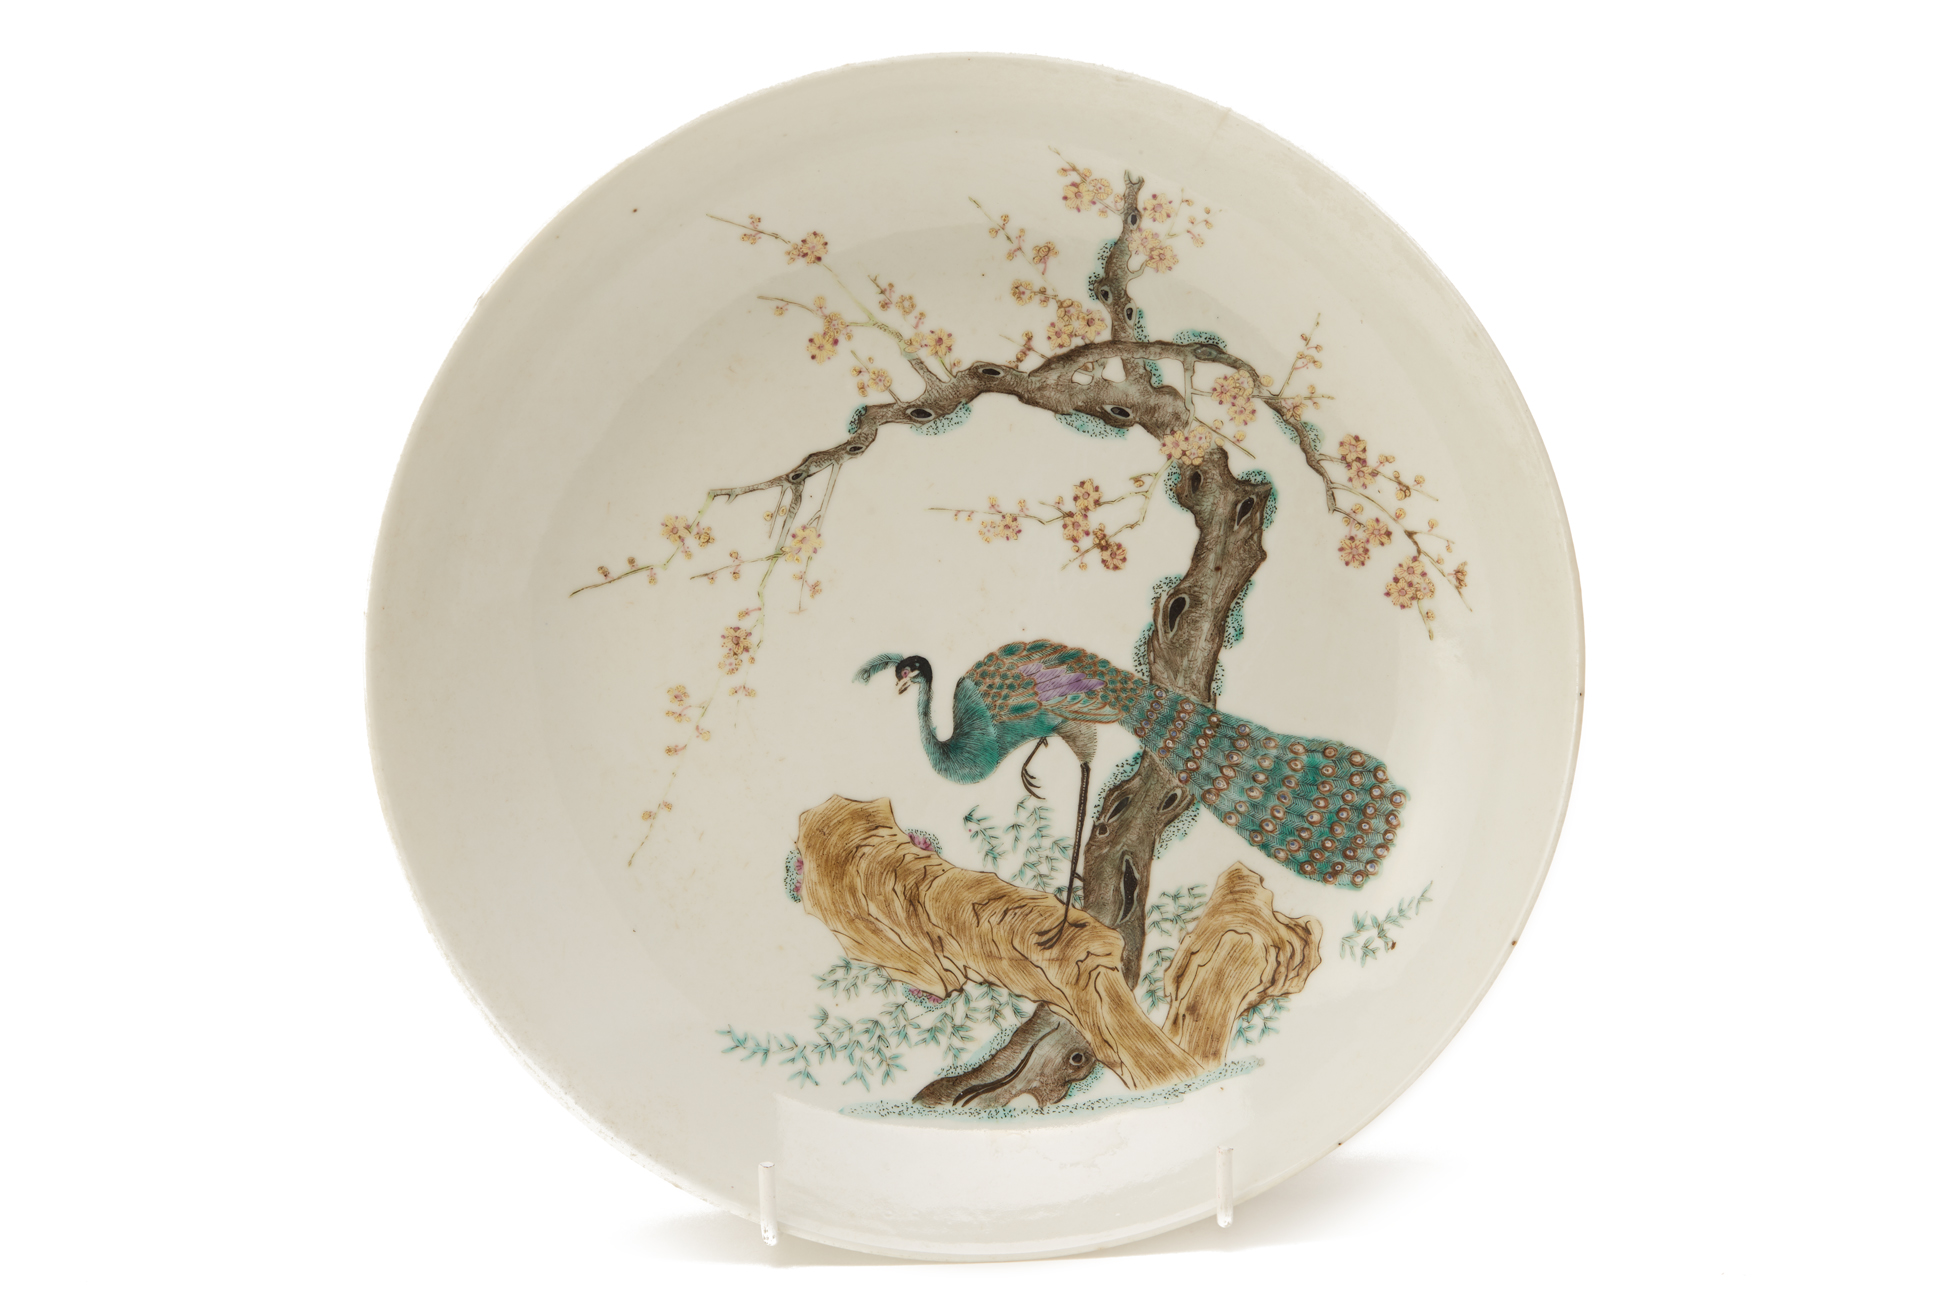 A FAMILLE ROSE PORCELAIN PEACOCK PLATE